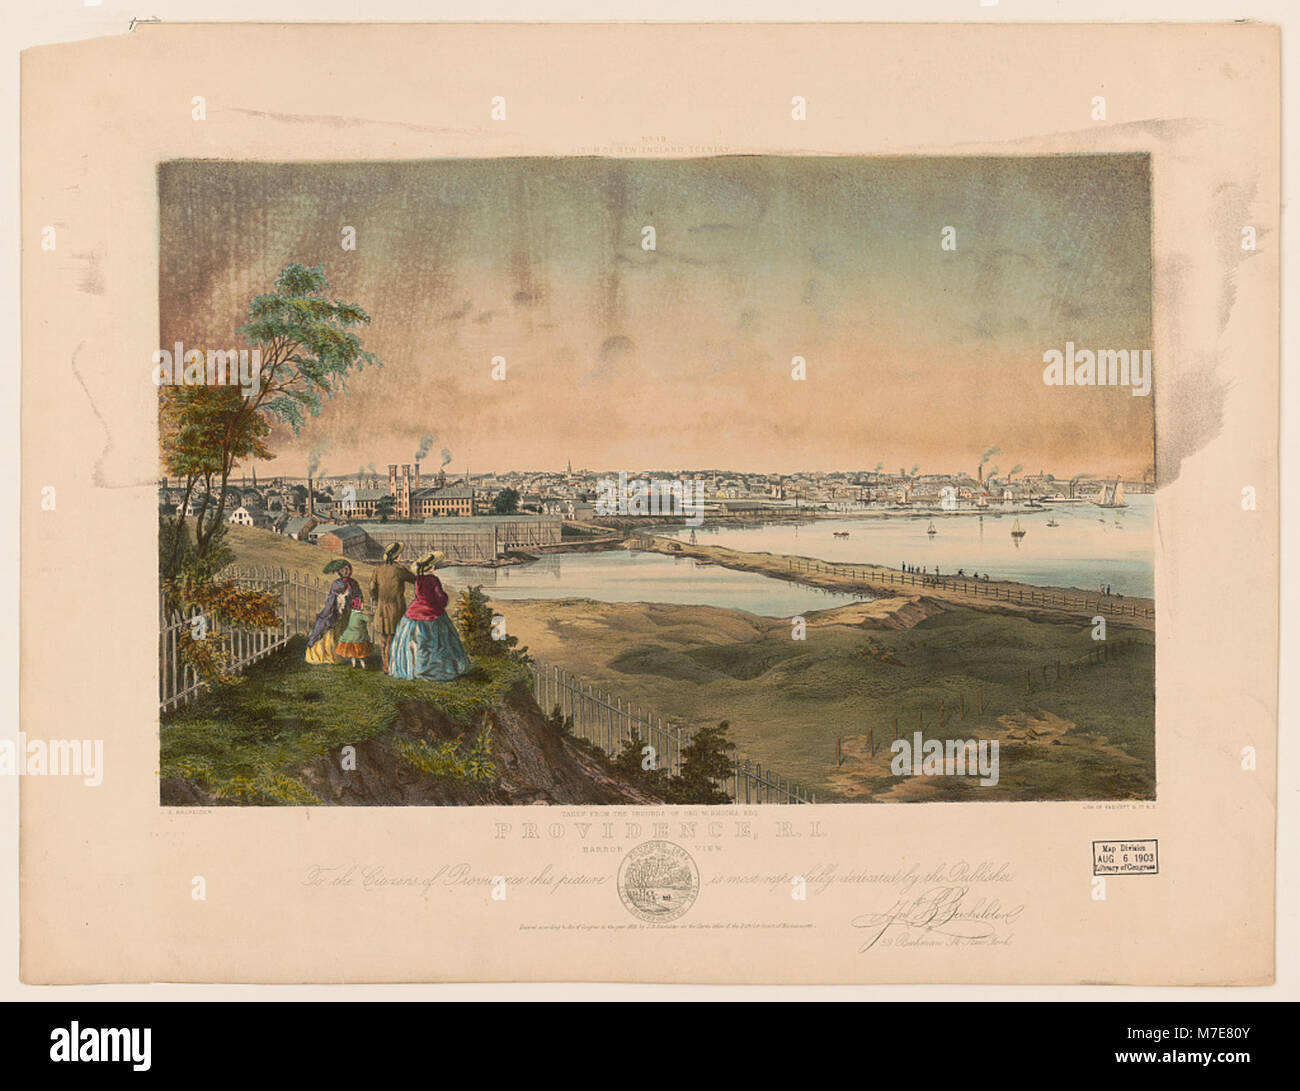 Providence, R.I., harbor view, taken from the grounds of Geo. W. Rhodes, Esq. - J.B. Bachelder ; lith. of Endicott & Co., N.Y. LCCN2003674129 Stock Photo